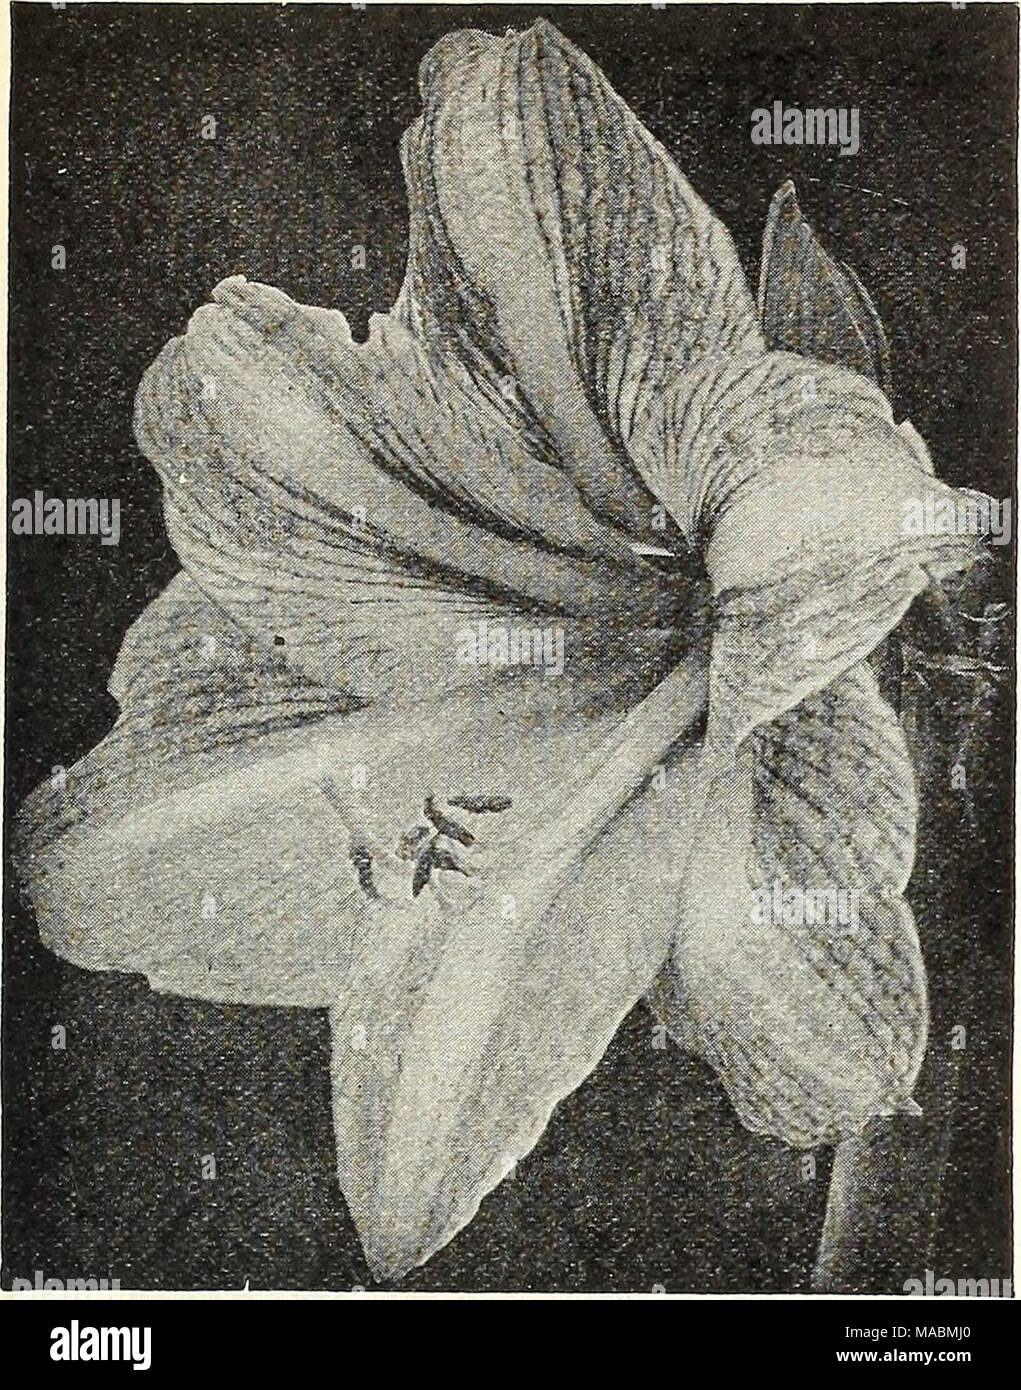 . Dreer's wholesale price list : flower seeds plants and bulbs vegetable seeds sundries for florists . Dreer's Giant American Hybrid Amaryllis Achimenes A plant closely allied to the Gloxinia and which will succeed best under similar cultivation. Achimenes are supplied in small corms or rhizomes, and for best effect three or more should be planted in a pot. They continue in flower for a period of from 8 to 10 weeks. We offer six distinct varieties with flowers averaging IVi Inches in diameter. Ambroise Verschaffelt. Blush white with delicate tracings of pale purple. Galatea. Large deep lavende Stock Photo